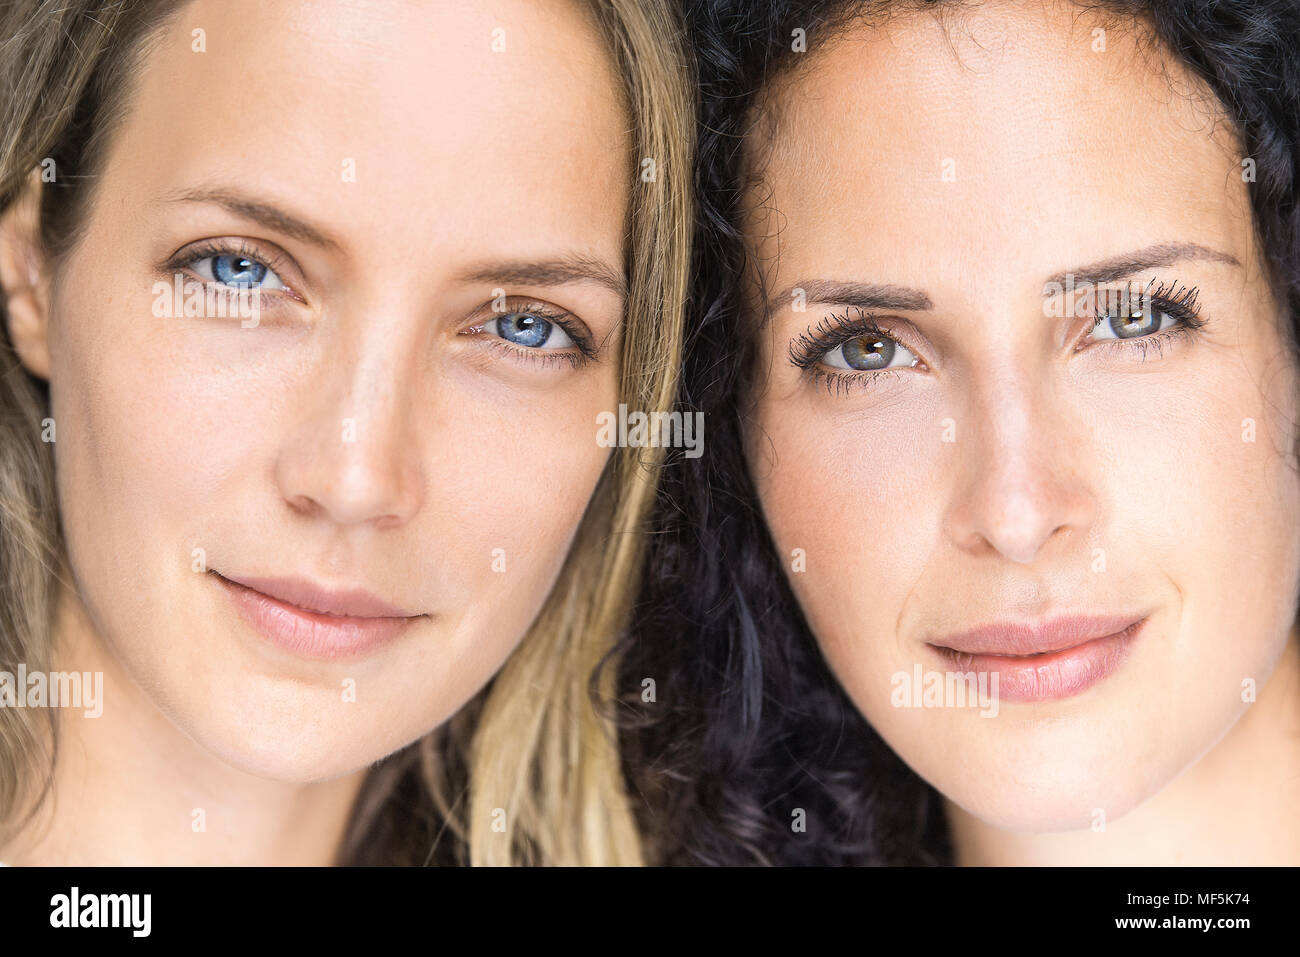 Portrait of two smiling women side by side Stock Photo